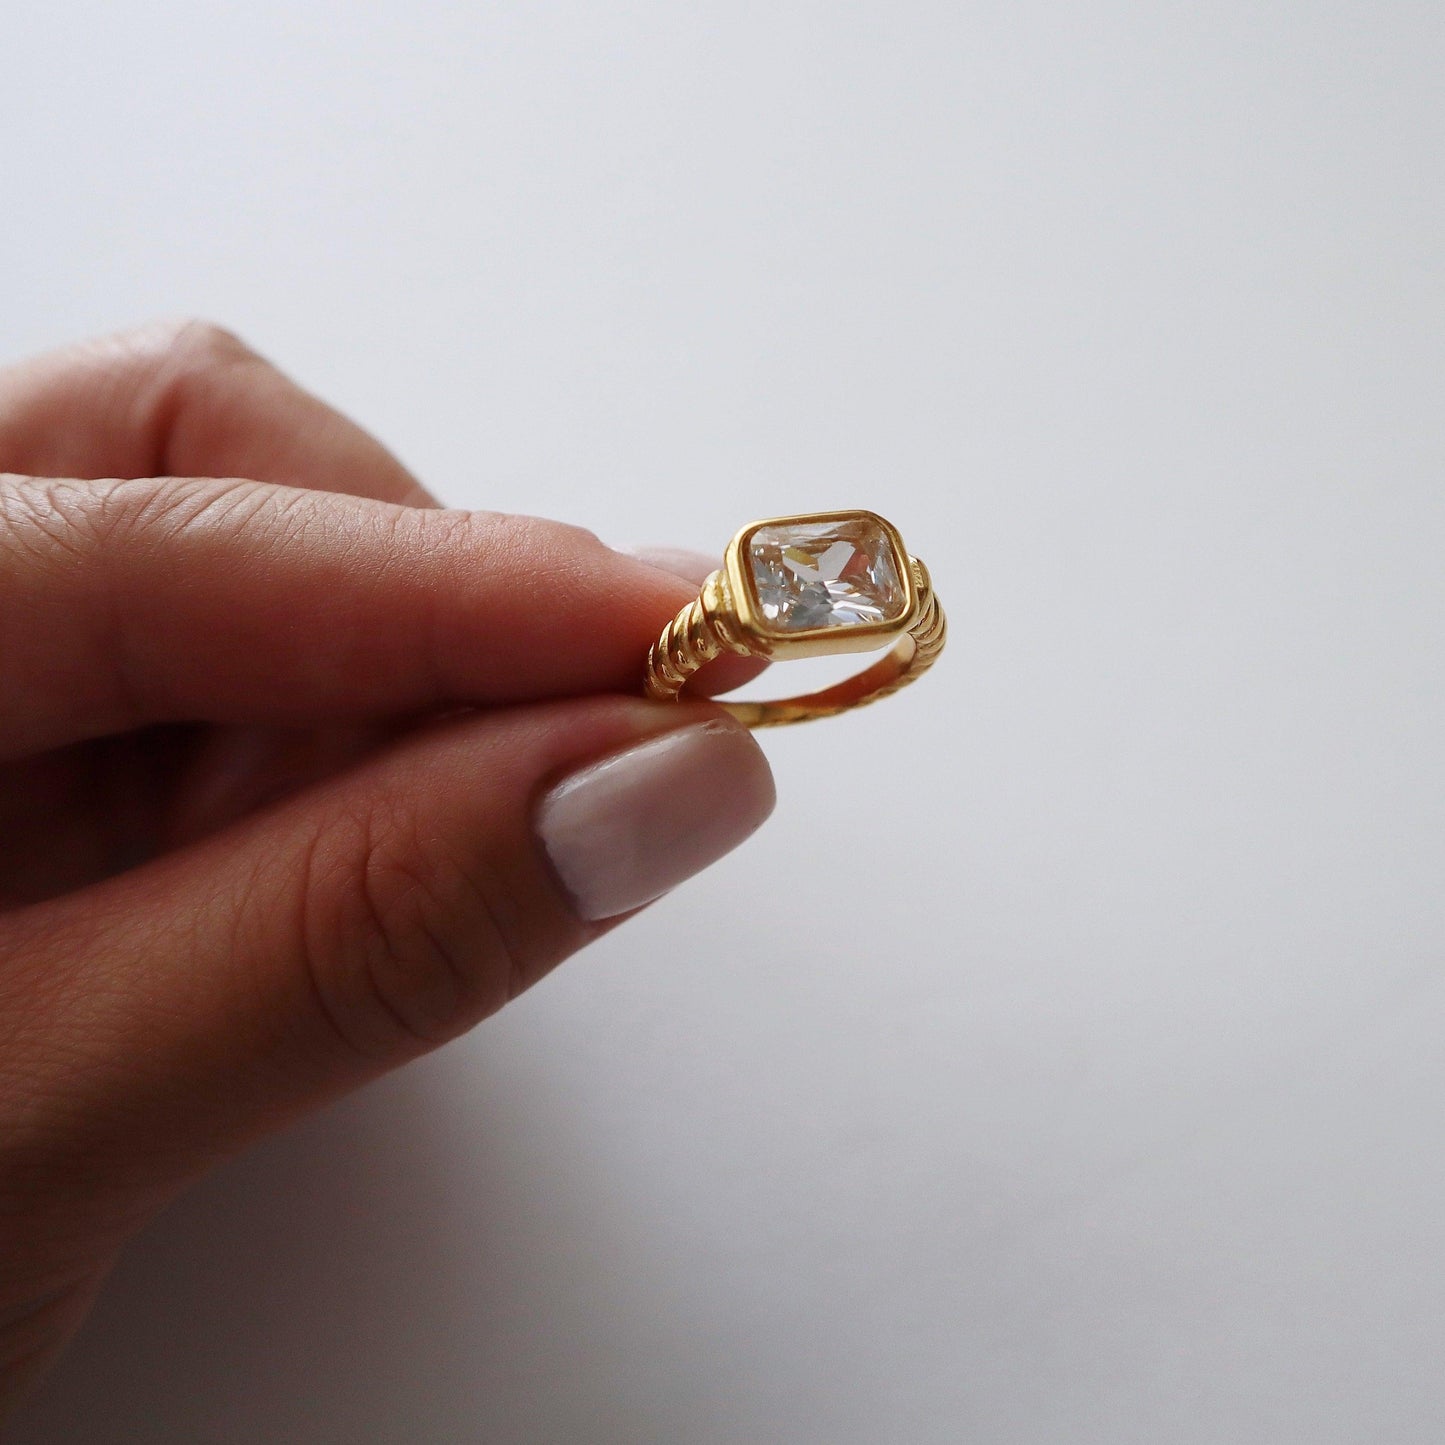 Willow Ring | Statement Ring - JESSA JEWELRY | GOLD JEWELRY; dainty, affordable gold everyday jewelry. Tarnish free, water-resistant, hypoallergenic. Jewelry for everyday wear